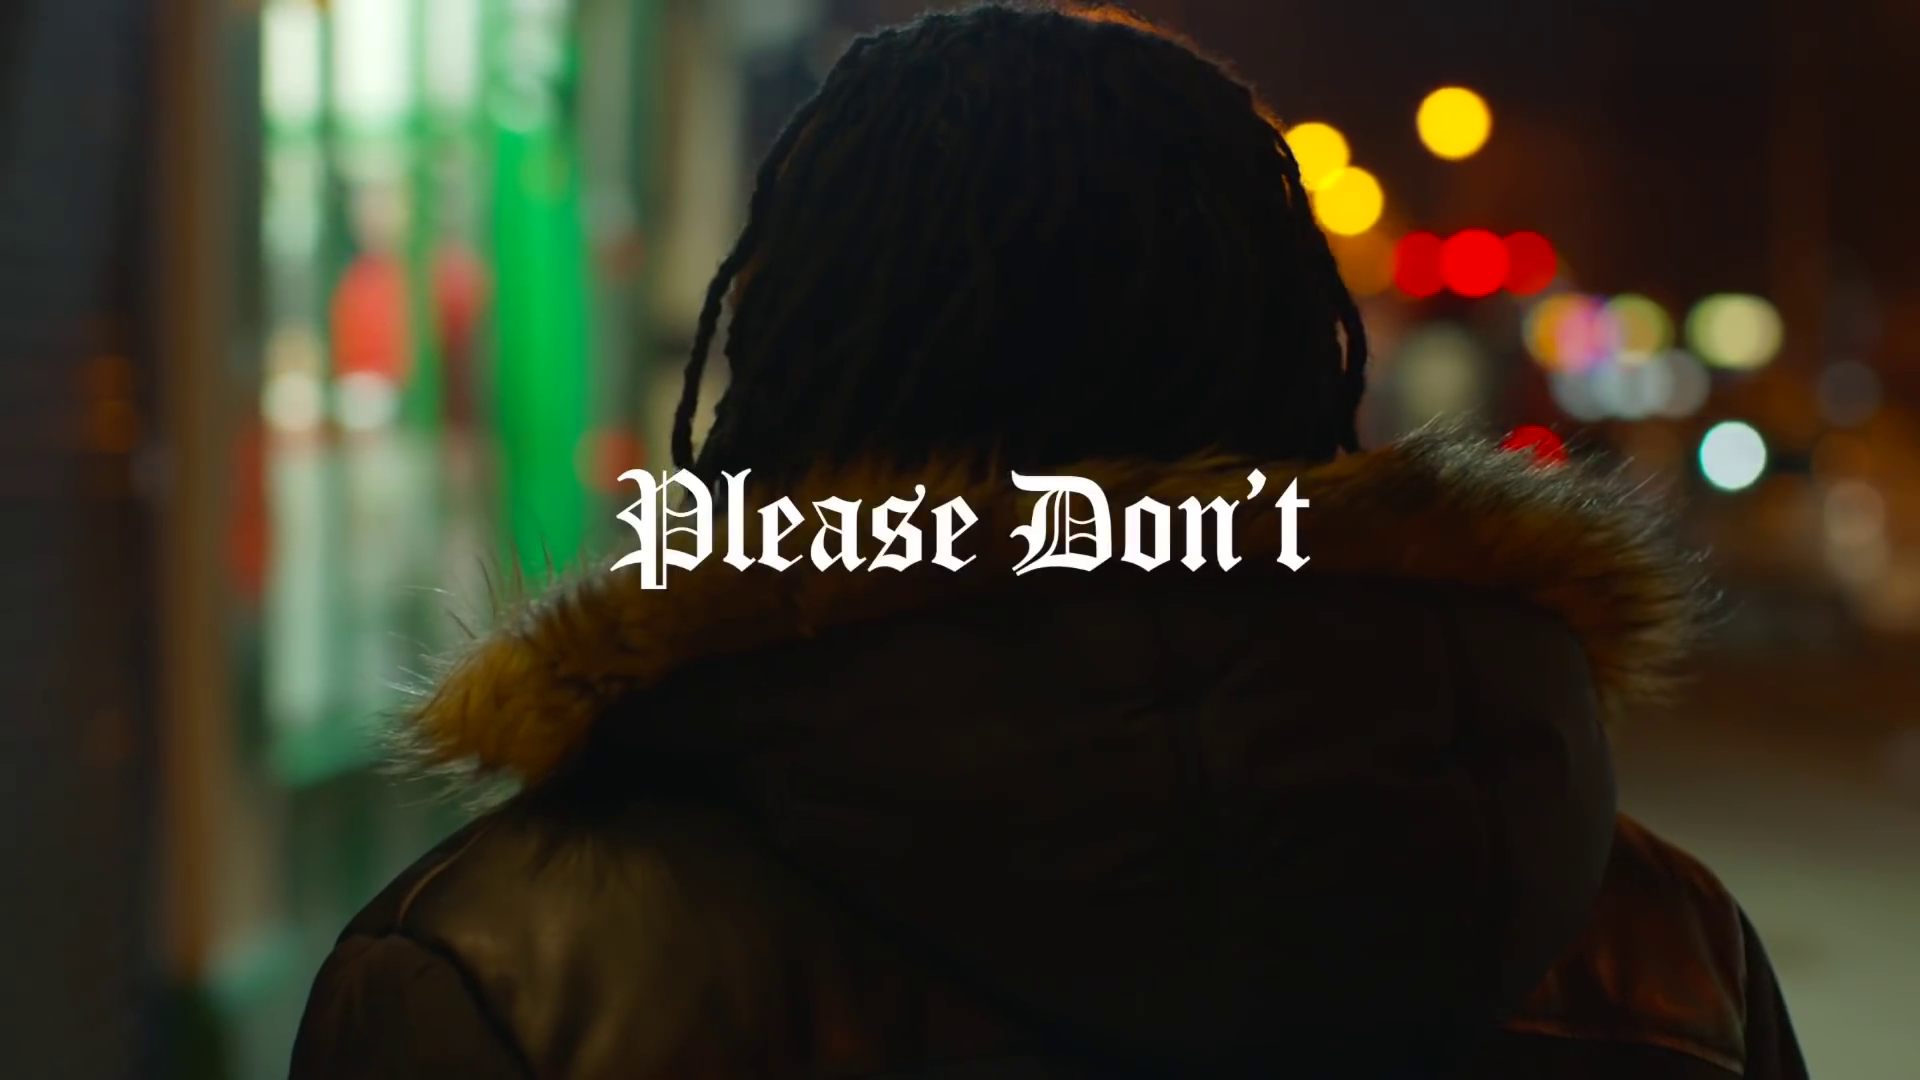 C Woodz - Please Don’t (Official Video) 